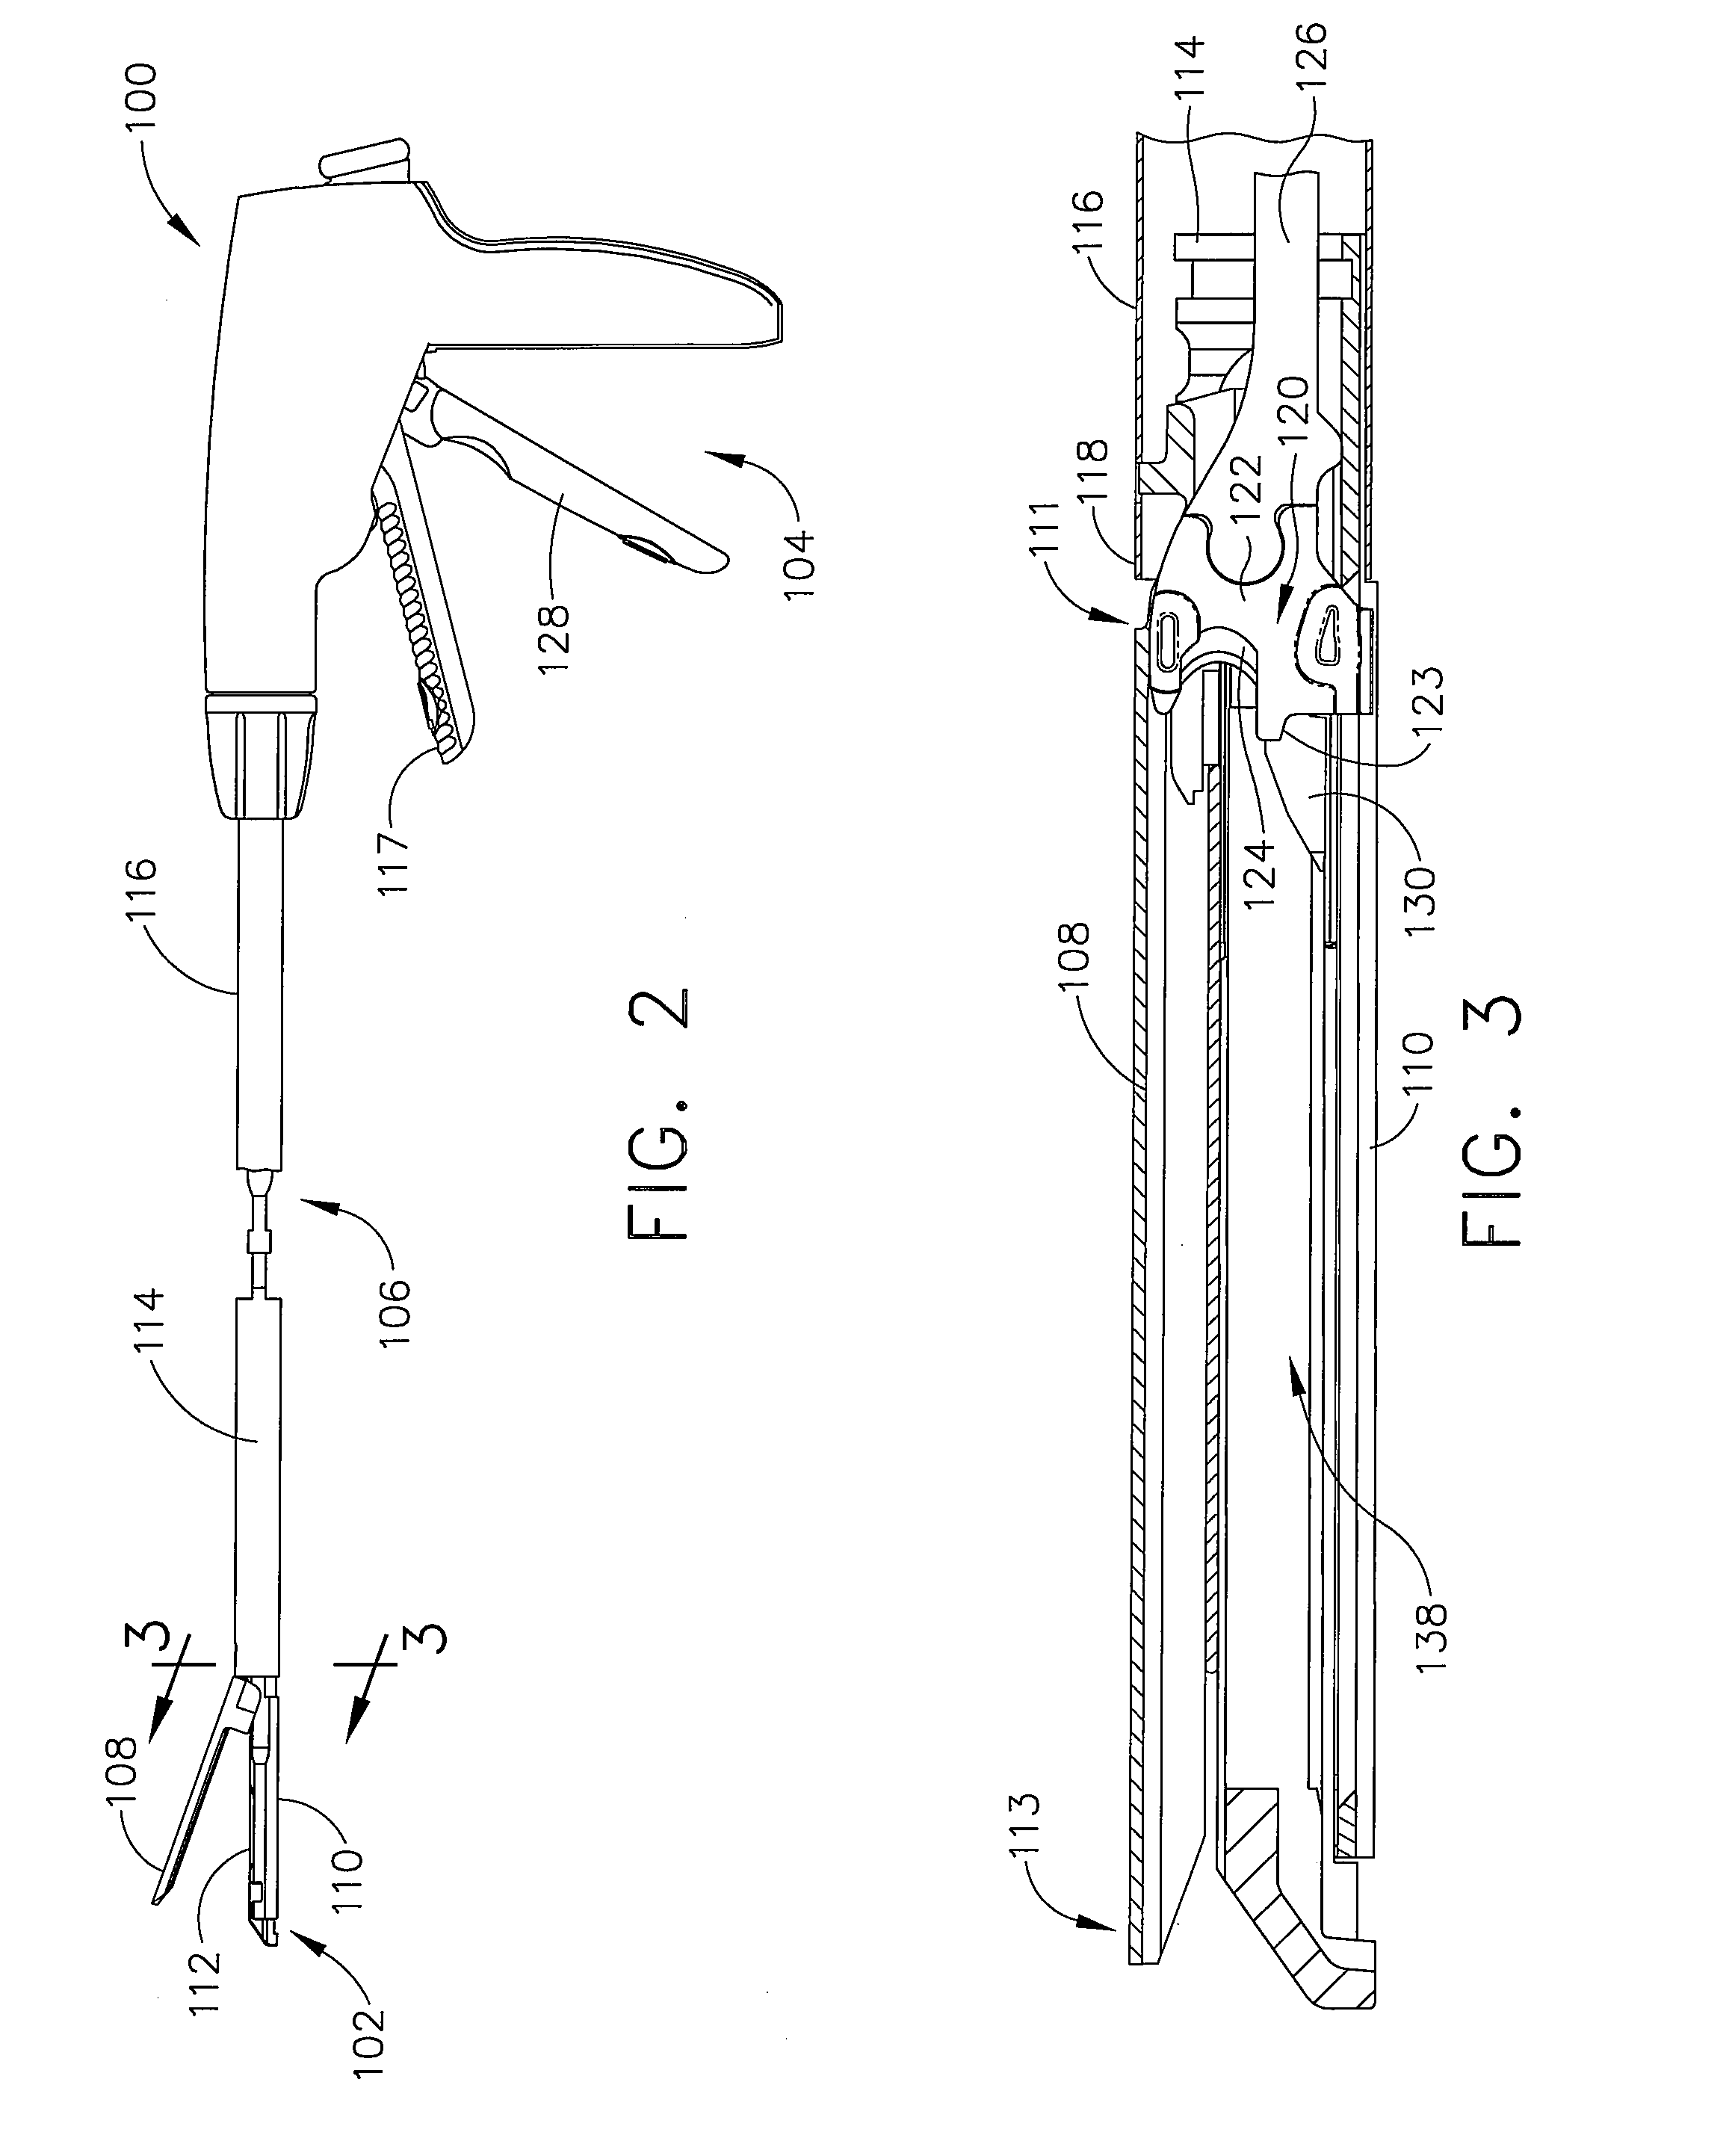 Surgical stapler end effector with tapered distal end